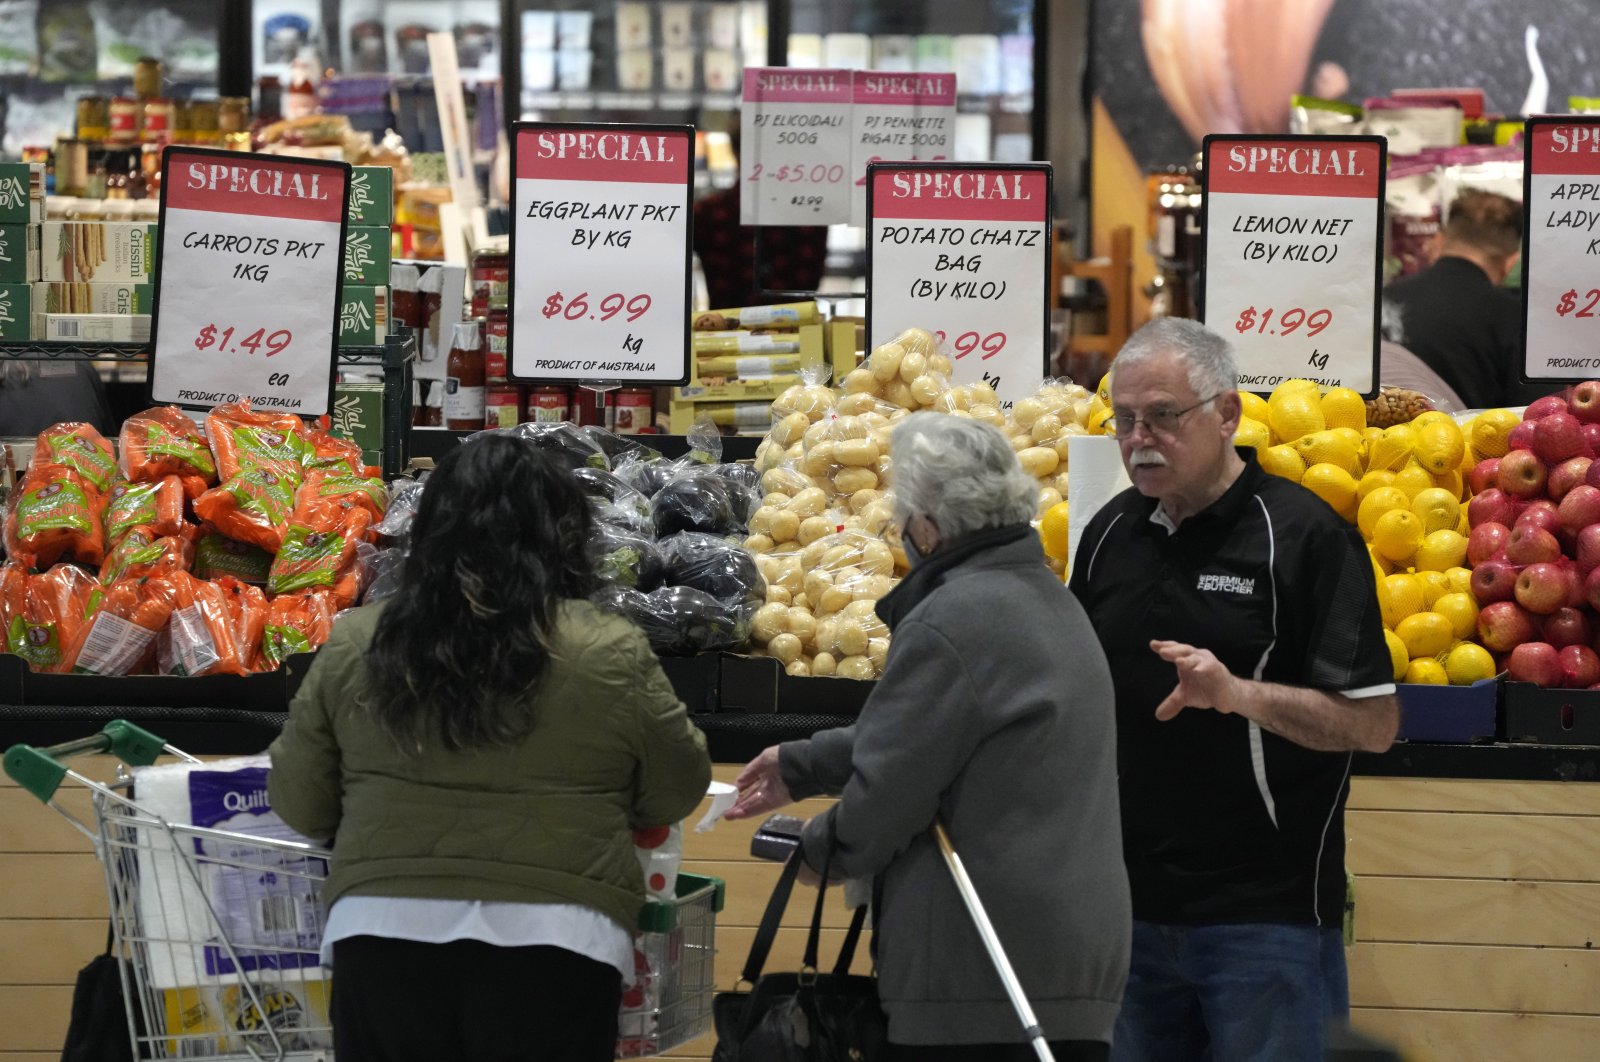 Shoppers look at produce at a shopping center in Sydney, Australia, July 27, 2022. (AP Photo)